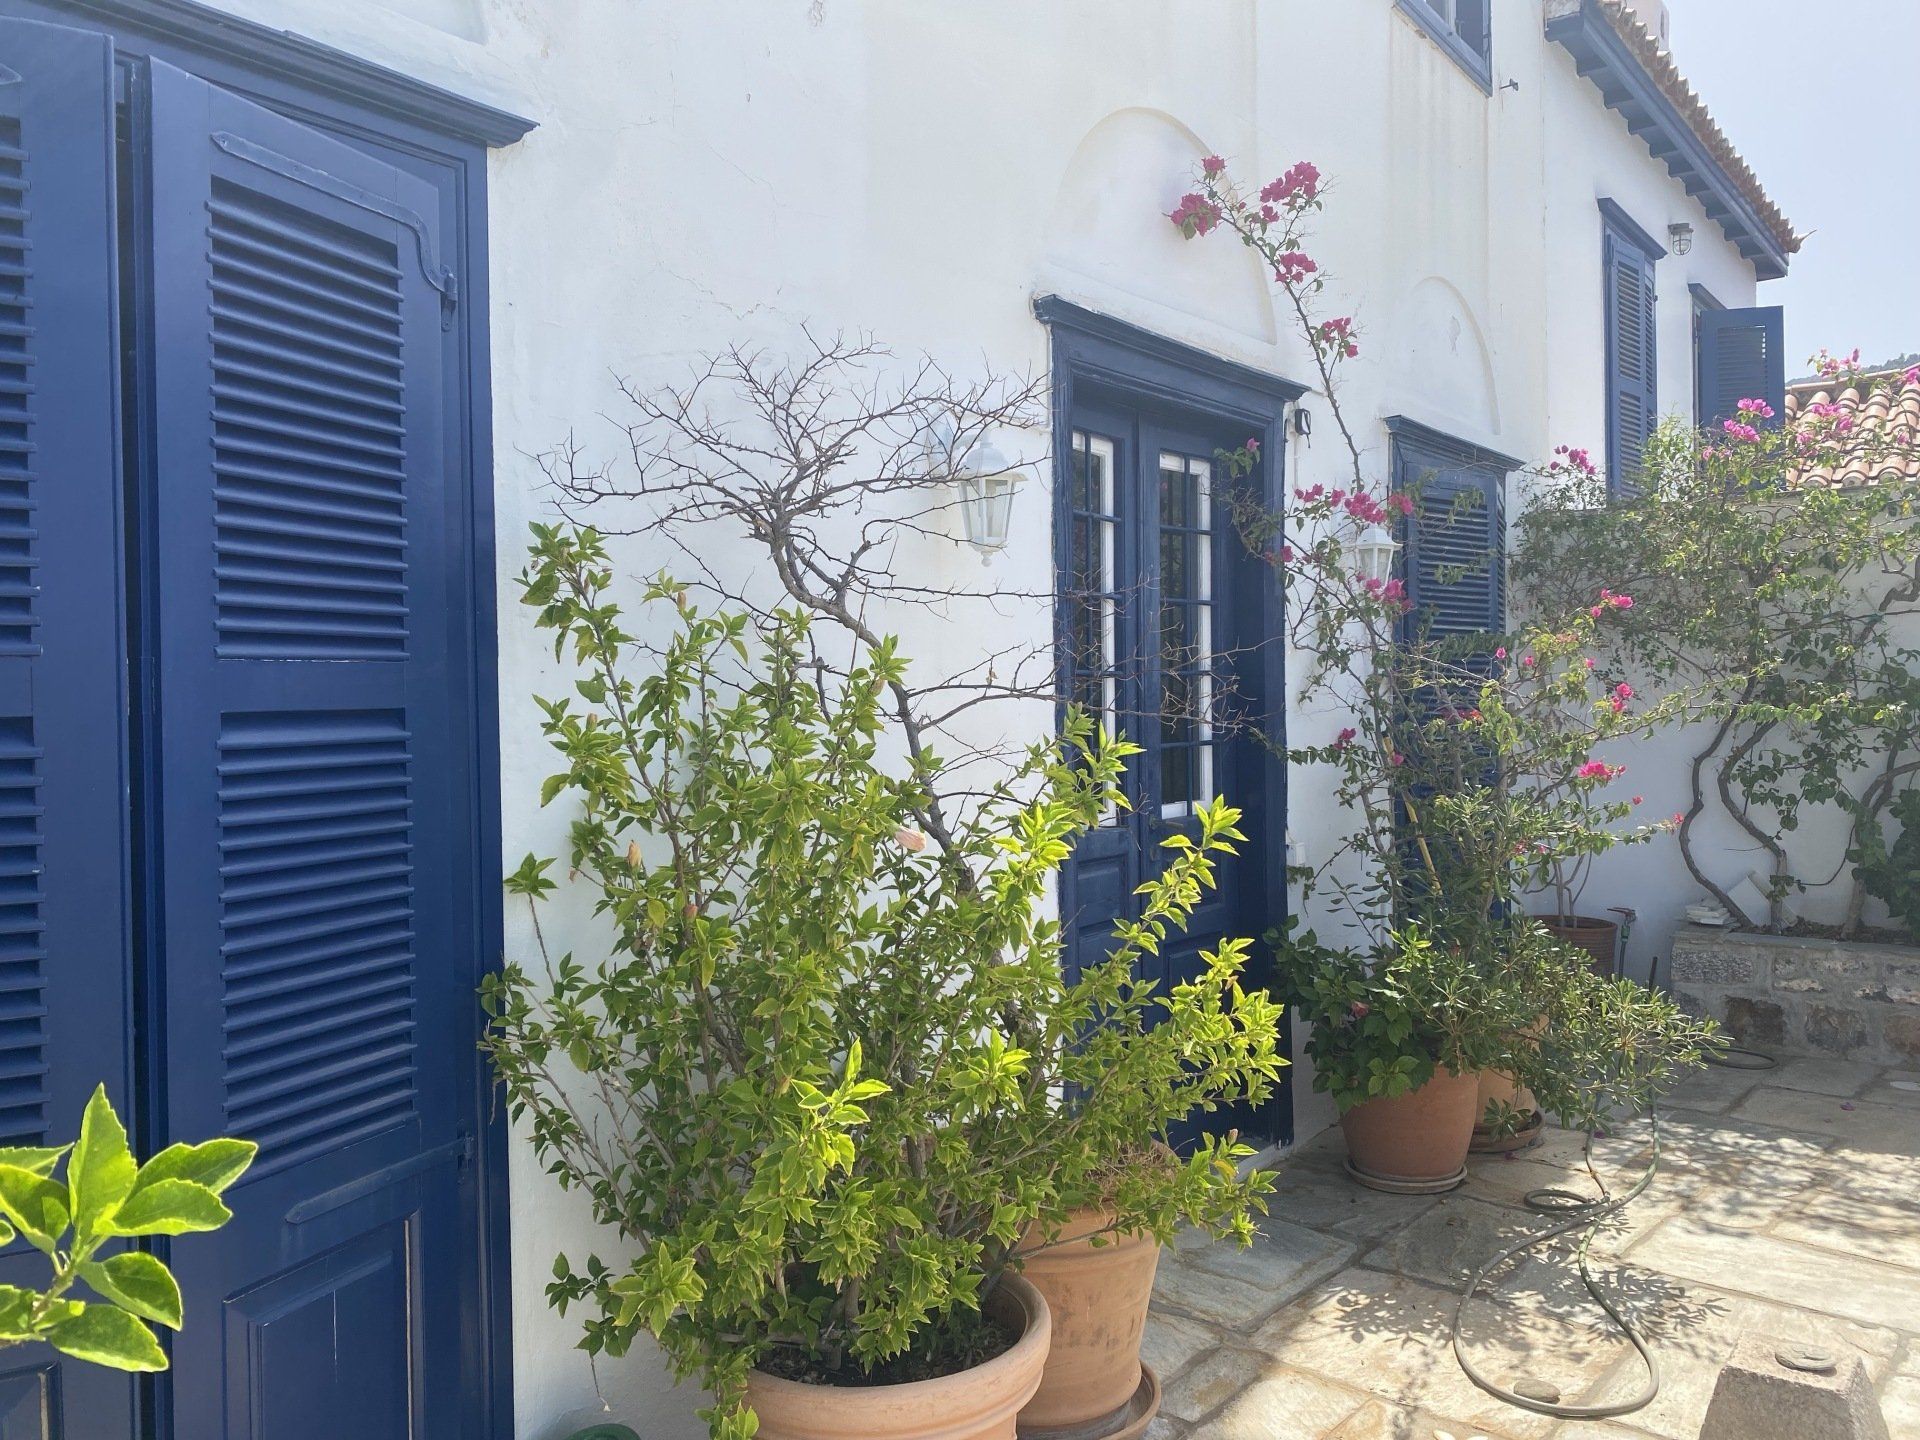 Eastside Apartment sold by Hydradirect on Hydra Island Greece